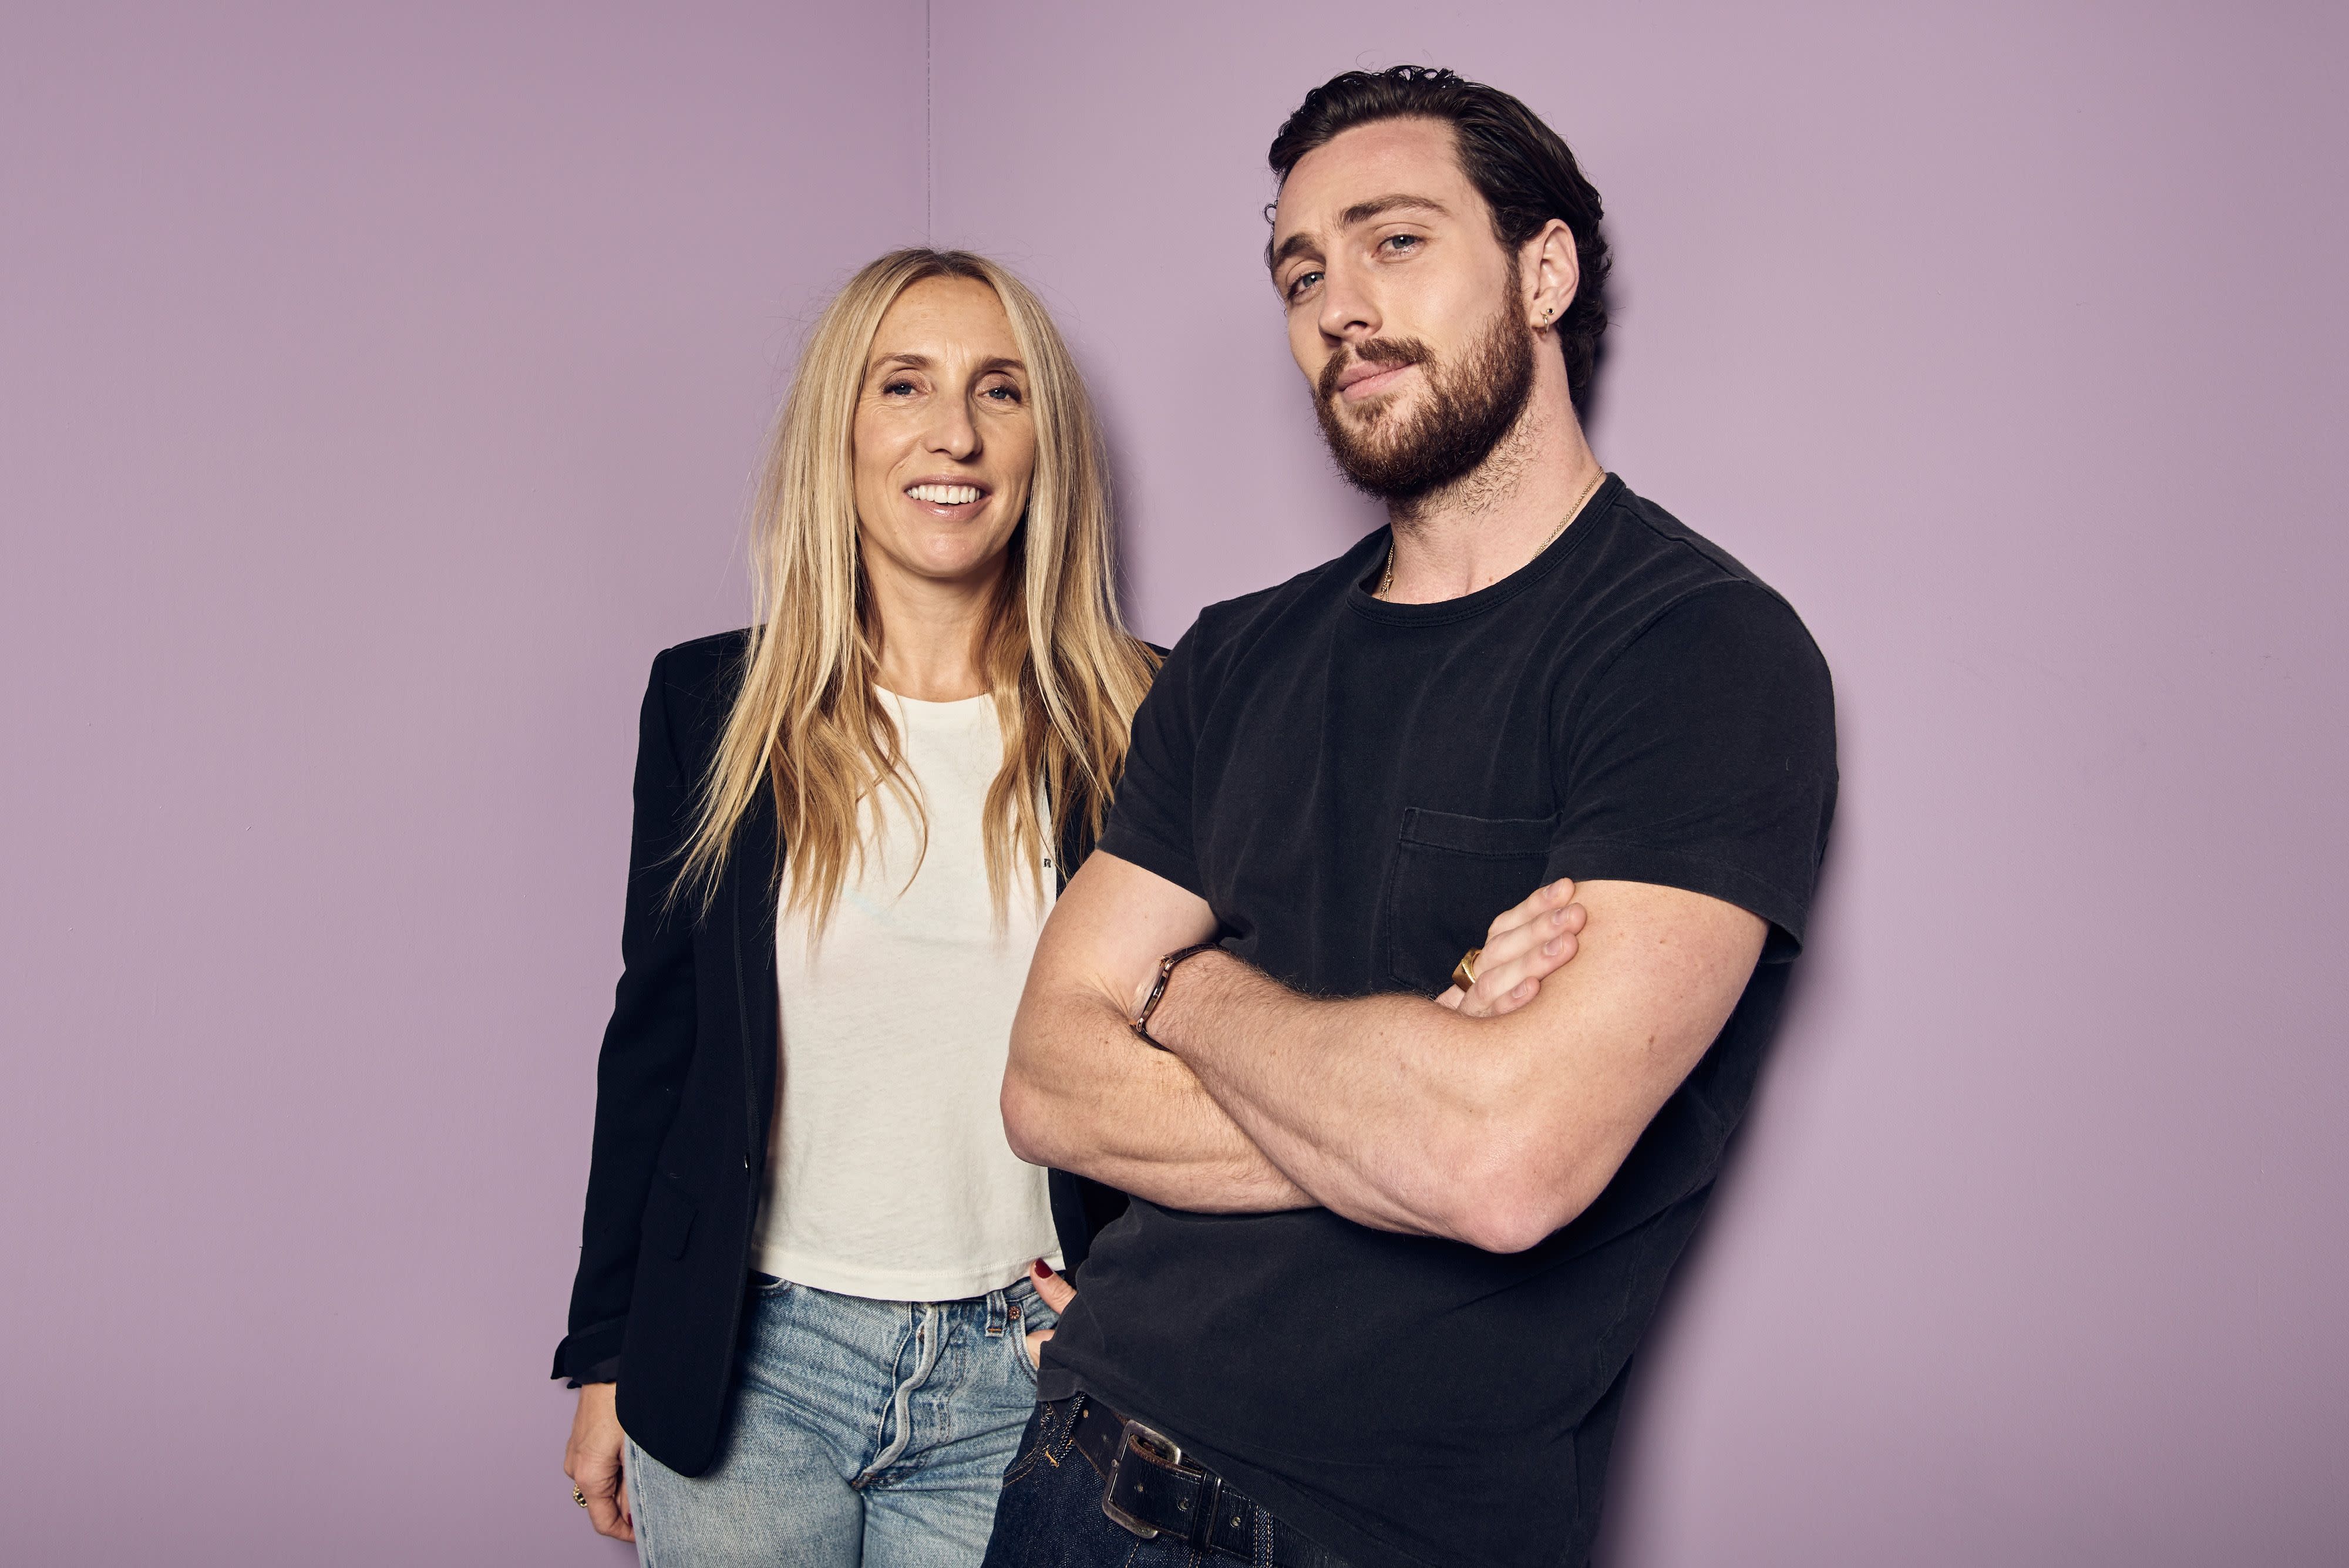 Aaron Taylor-Johnson Reminds Fans on Instagram of His Upcoming Film ‘A Million Little Pieces’ - Yahoo Entertainment